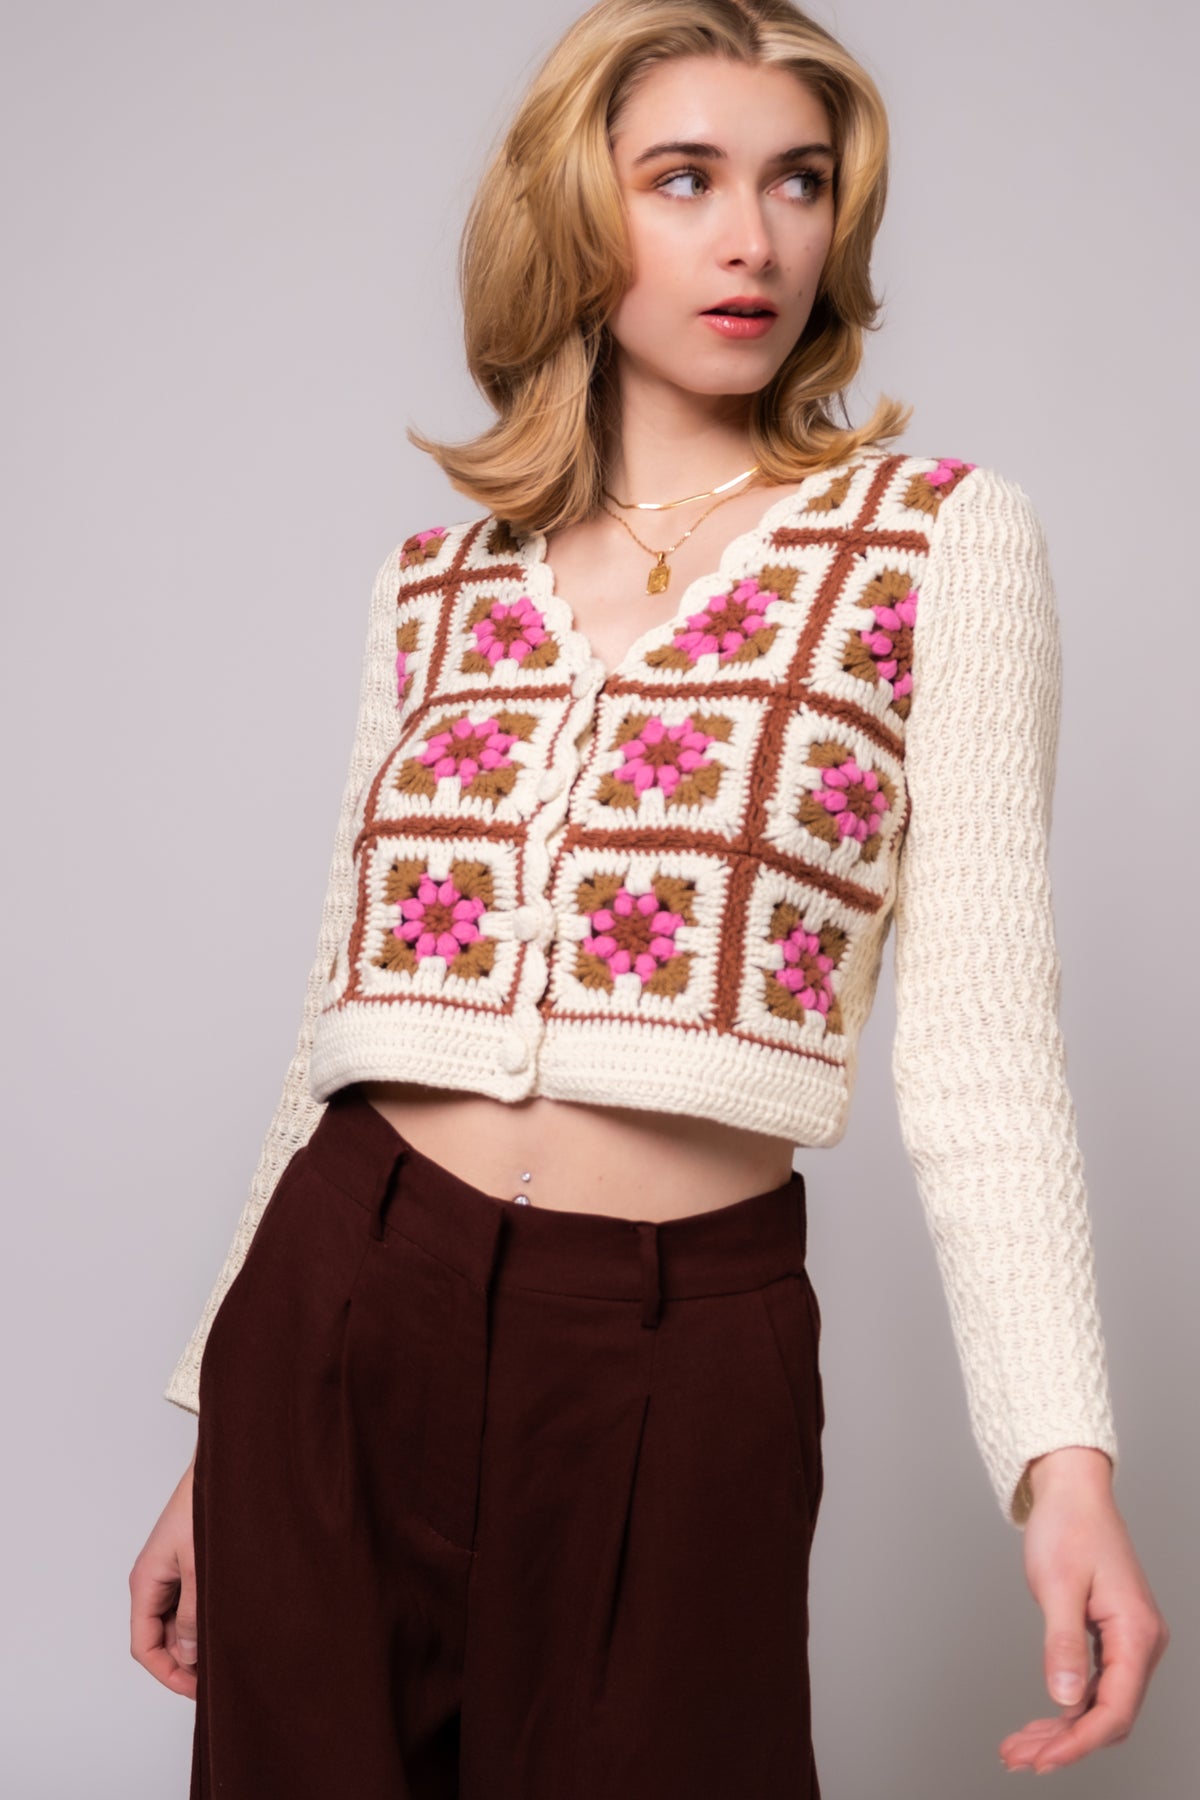 Saltwater Luxe Chels Crochet Square Cardi